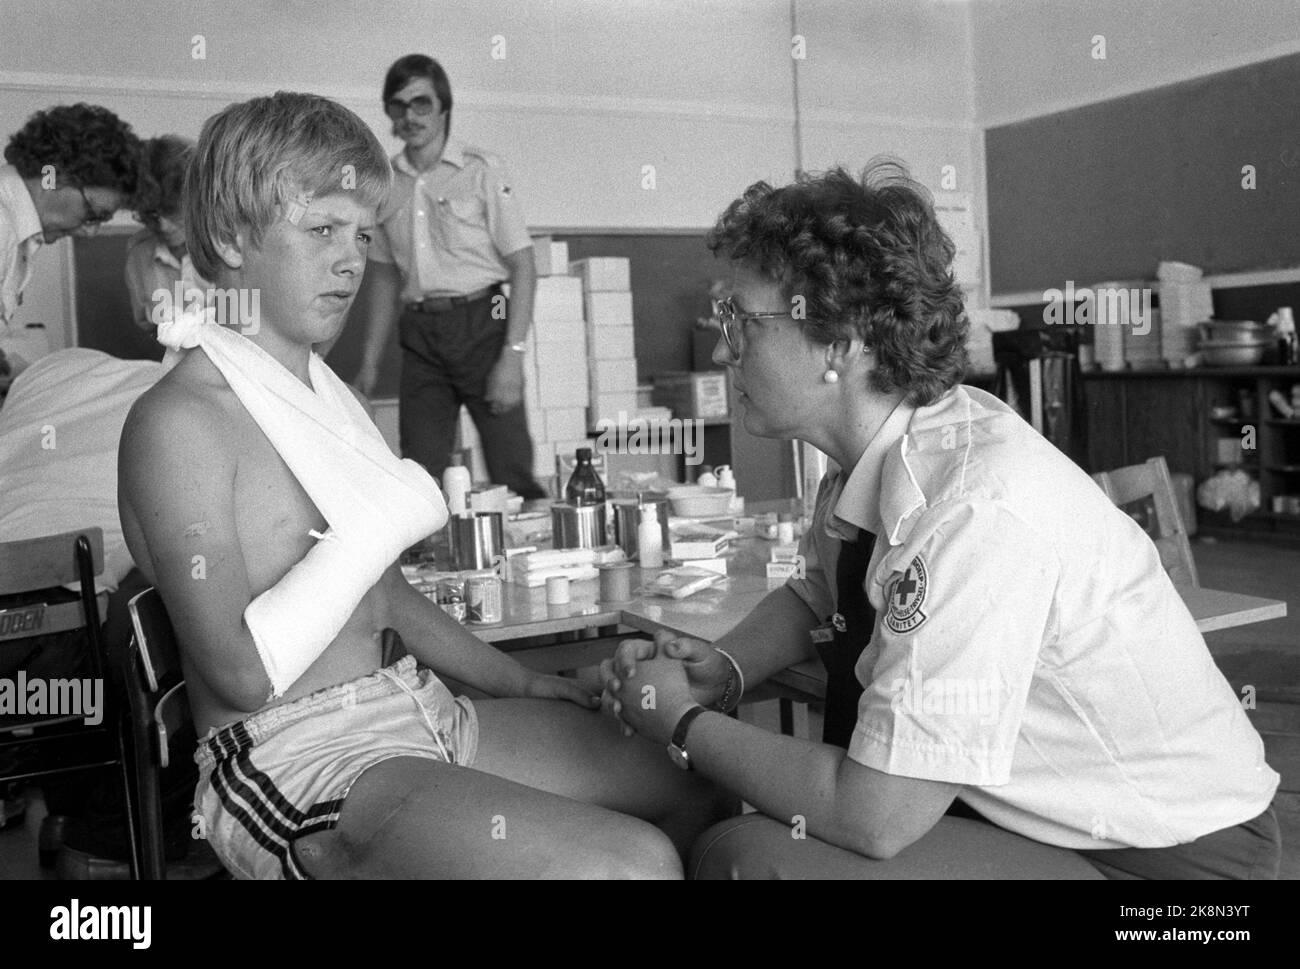 Oslo 19820802. Norway Cup1982 10th anniversary. International football tournament for children and youth at Ekebergsletta. Here is a football player treatment at the medical room. The entire Ekeberghallen has been used to saturate the 10,000 hungry football players. Photo: Inge Gjellesvik / Bjørn Sigurdsøn NTB / NTB Stock Photo